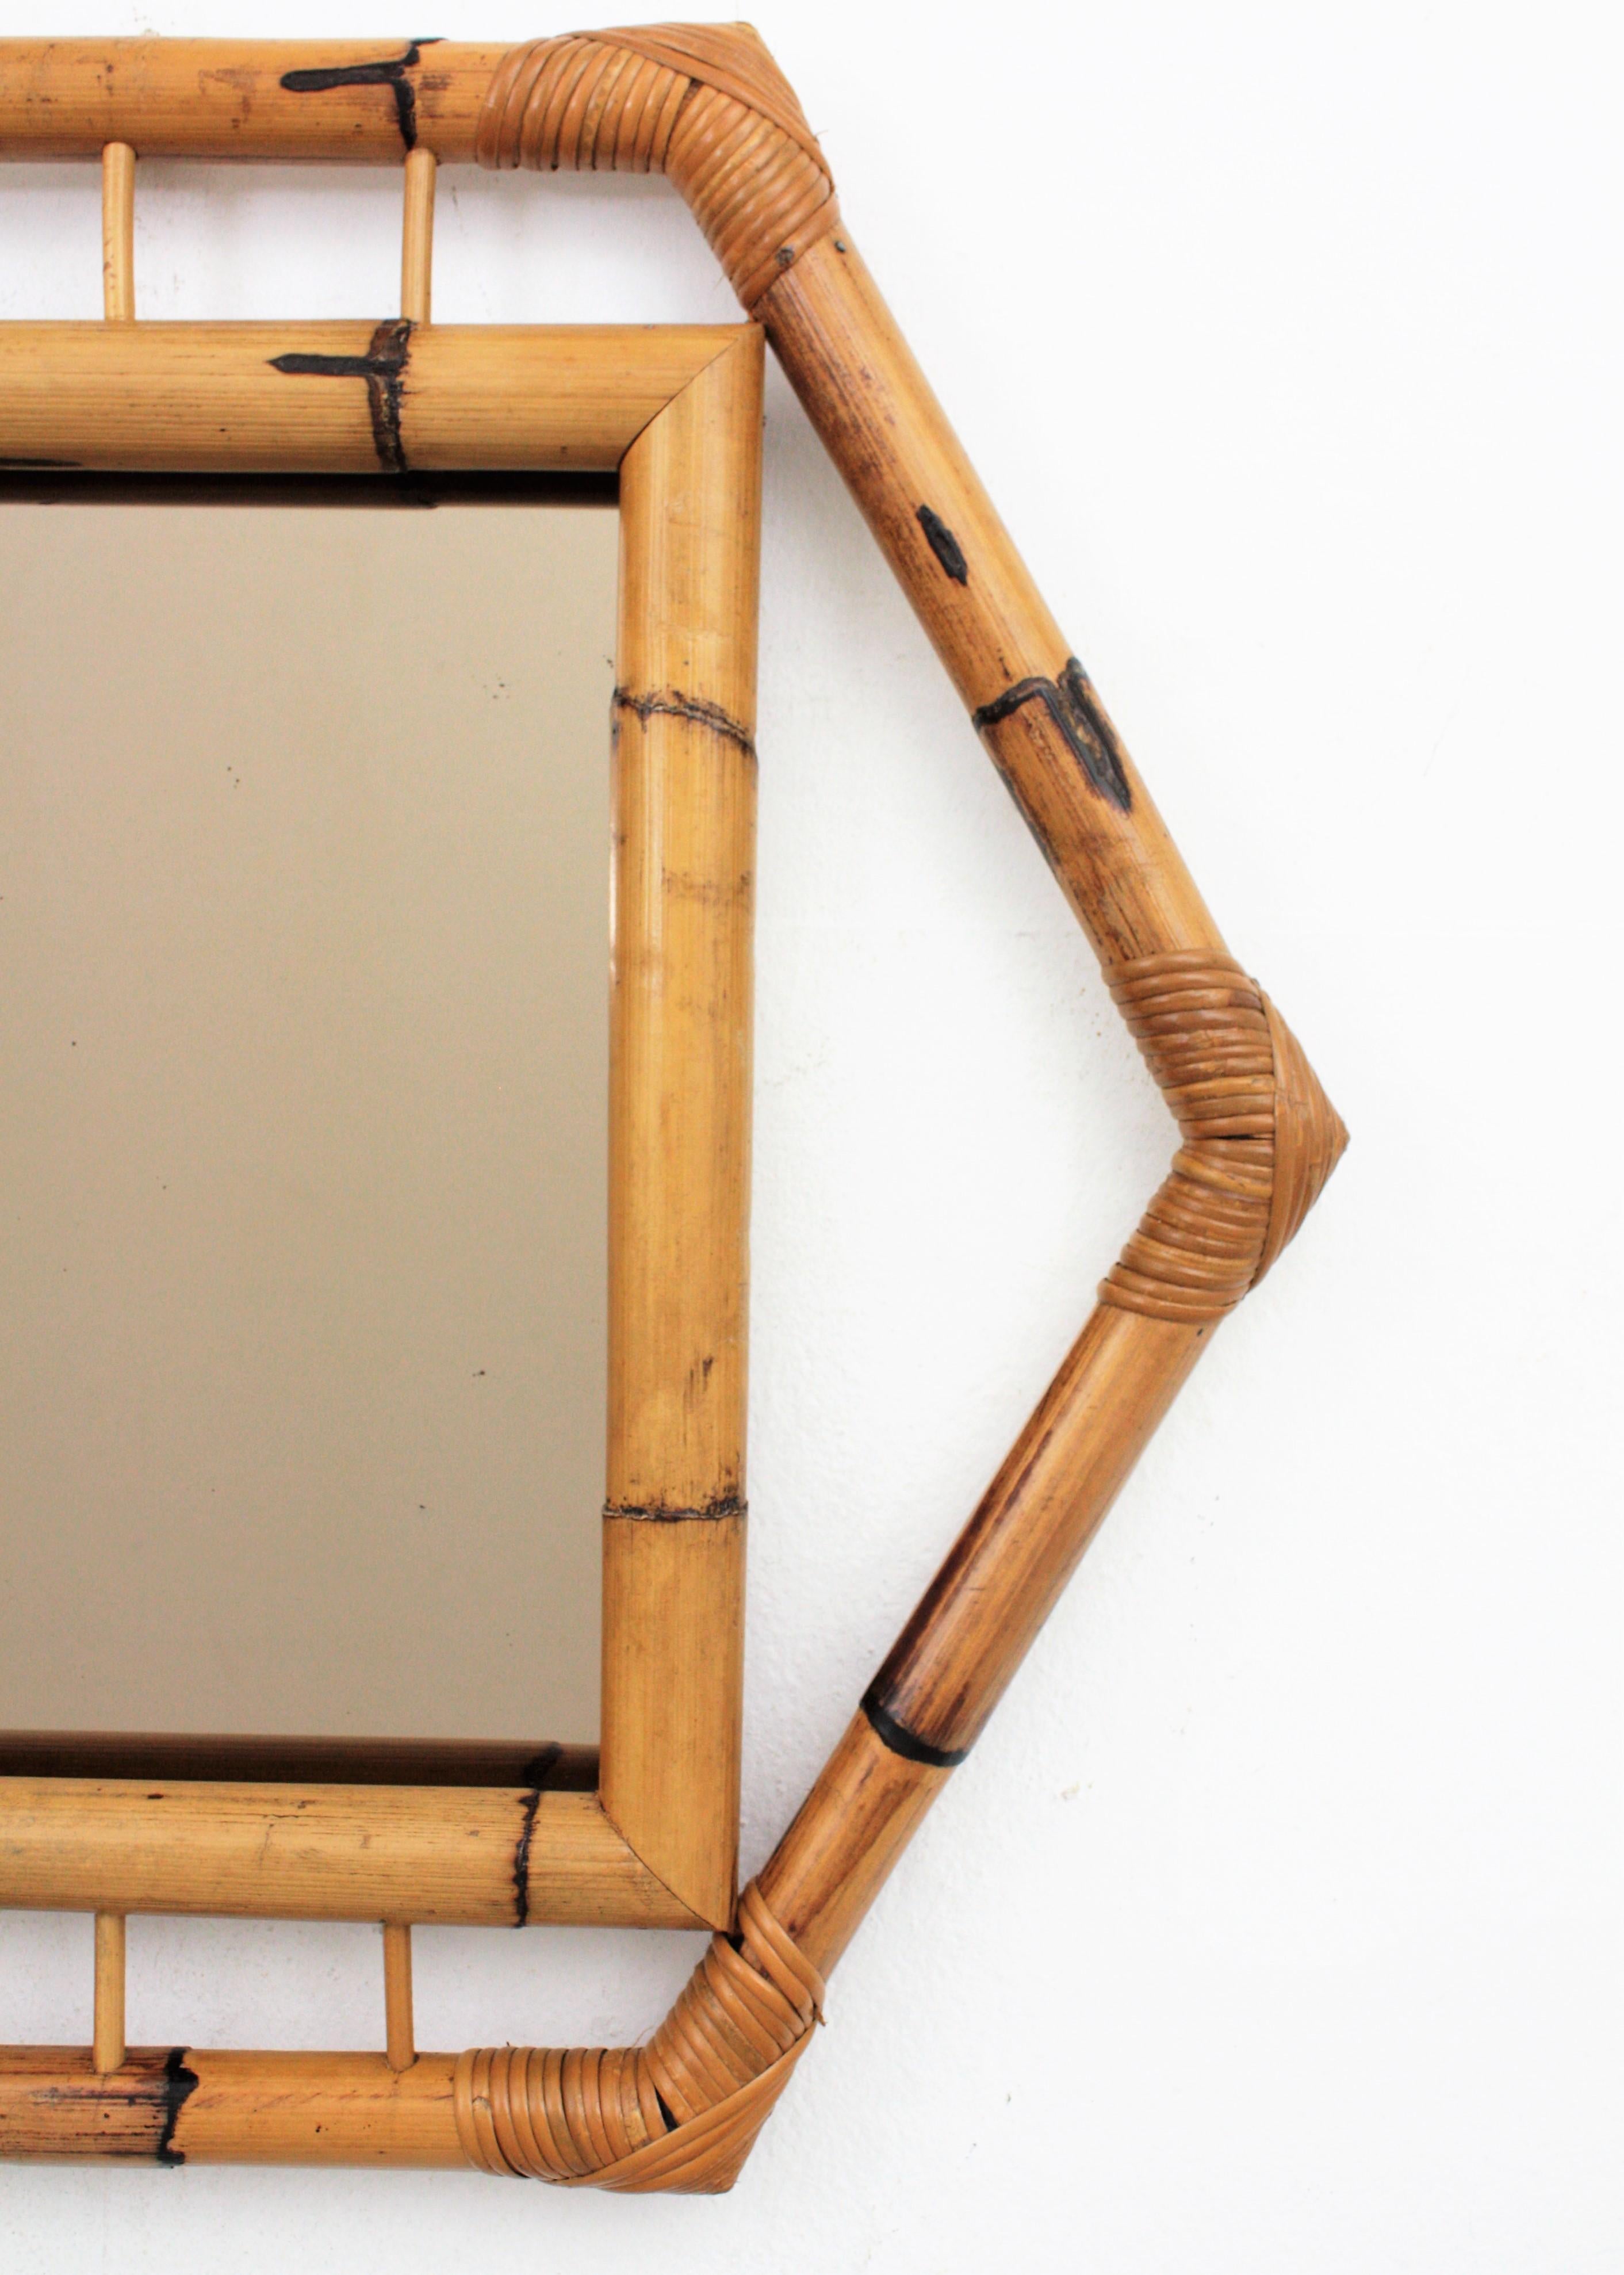 Bamboo Hexagonal Mirror with Smoked Glass, France, 1950s For Sale 2